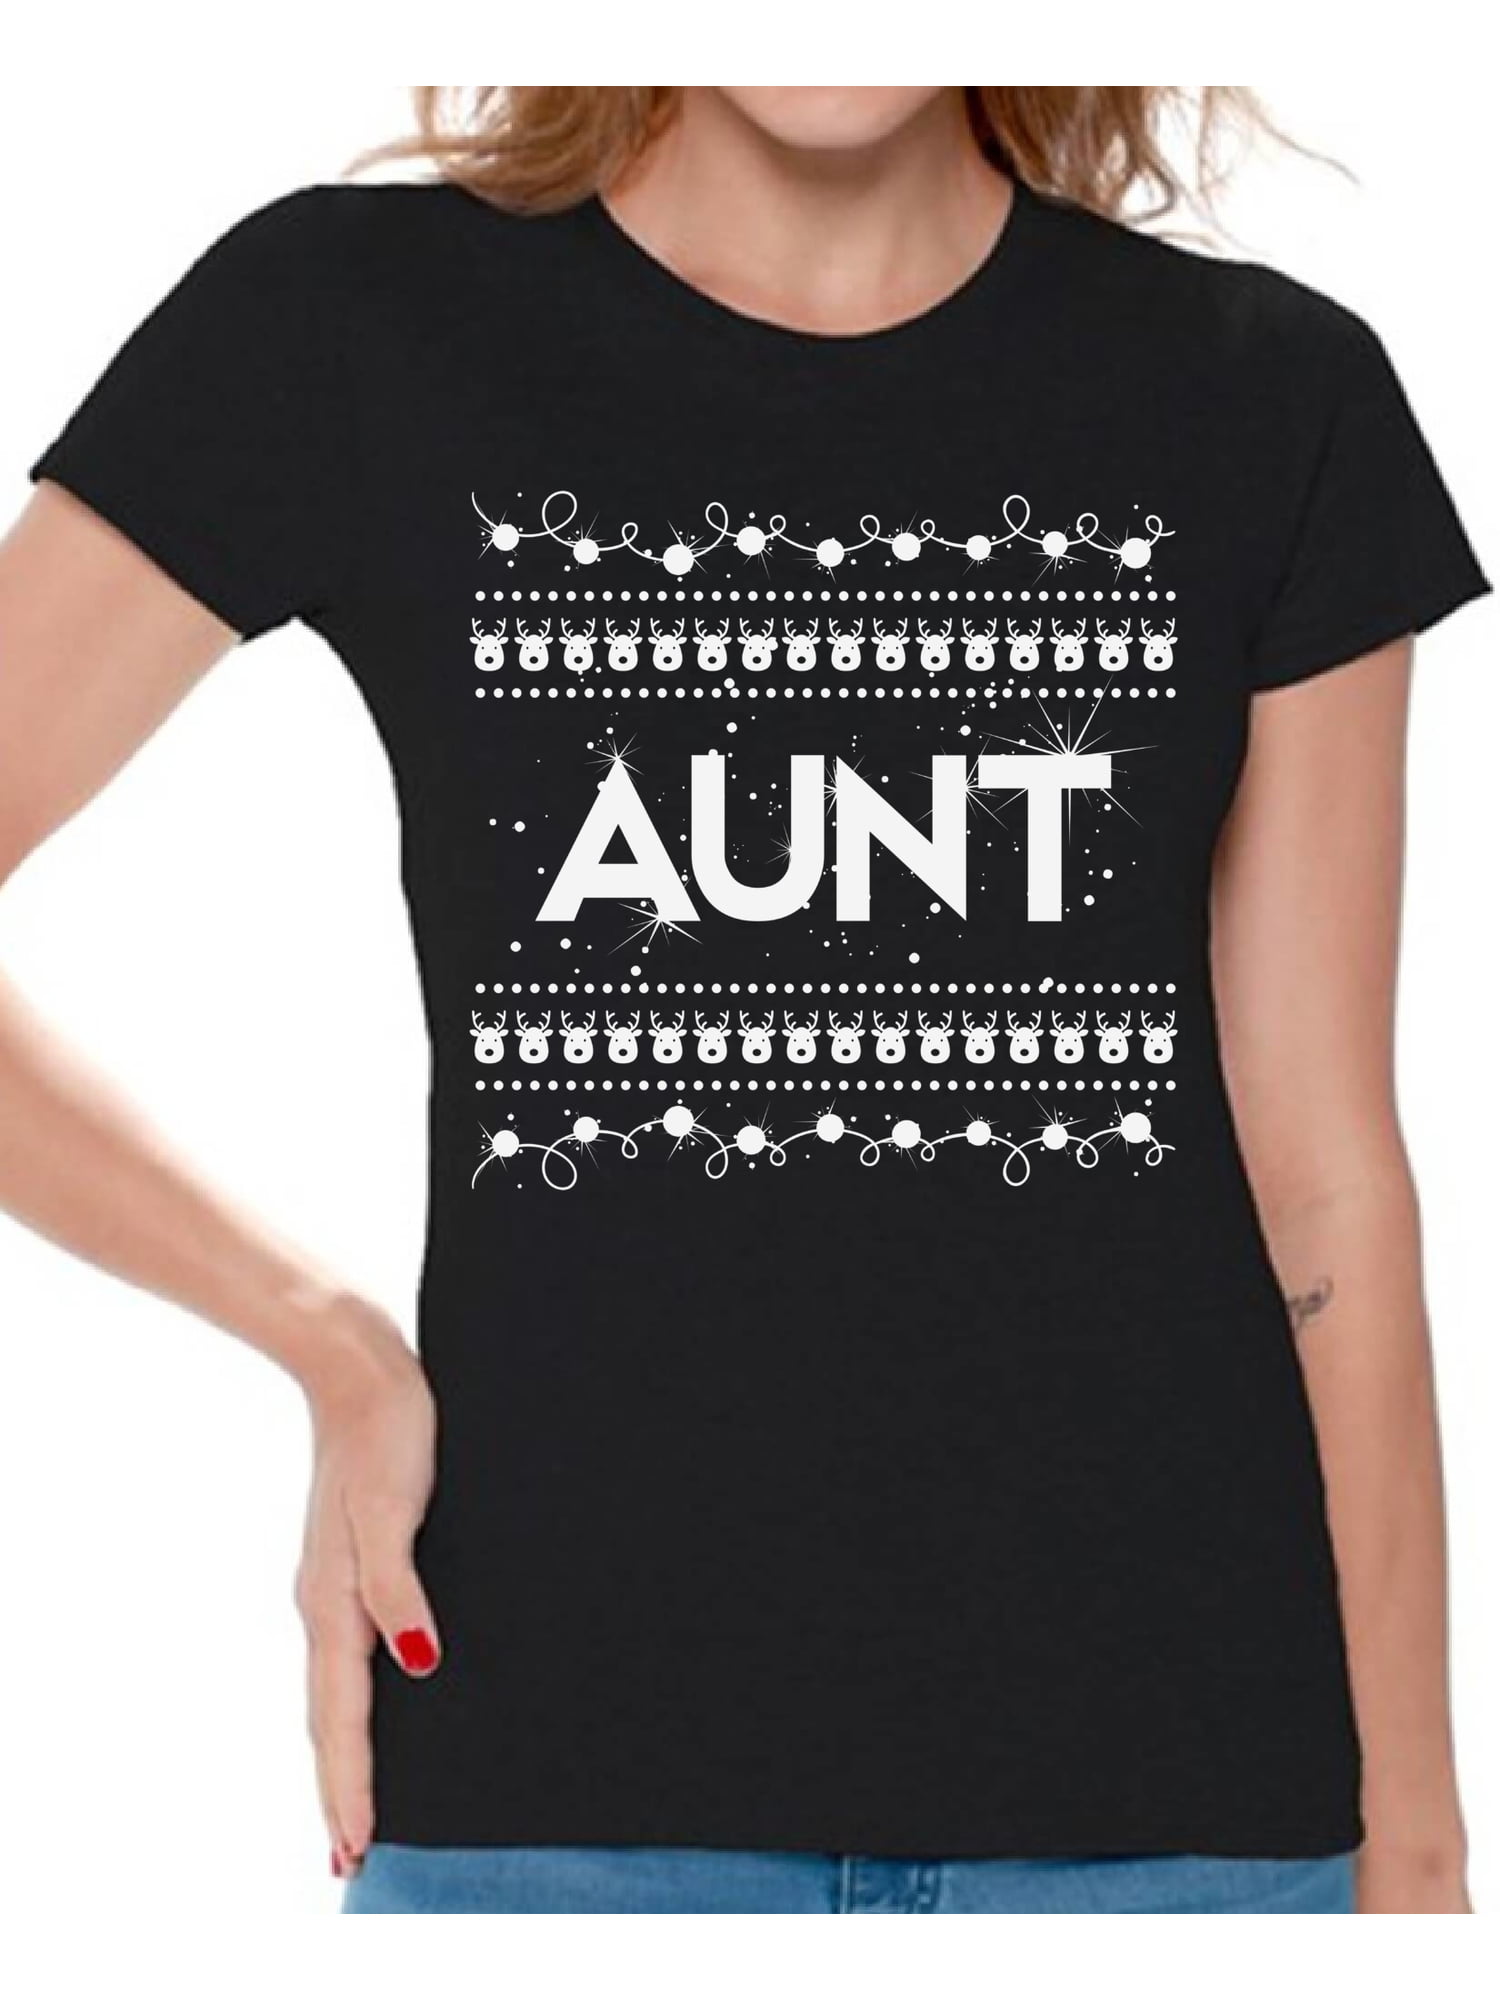 Aunt Christmas Shirt Auntie Claus Shirt Auntie shirt Cute Christmas Shirt Christmas Gift Ideas Aunt Christmas Gift